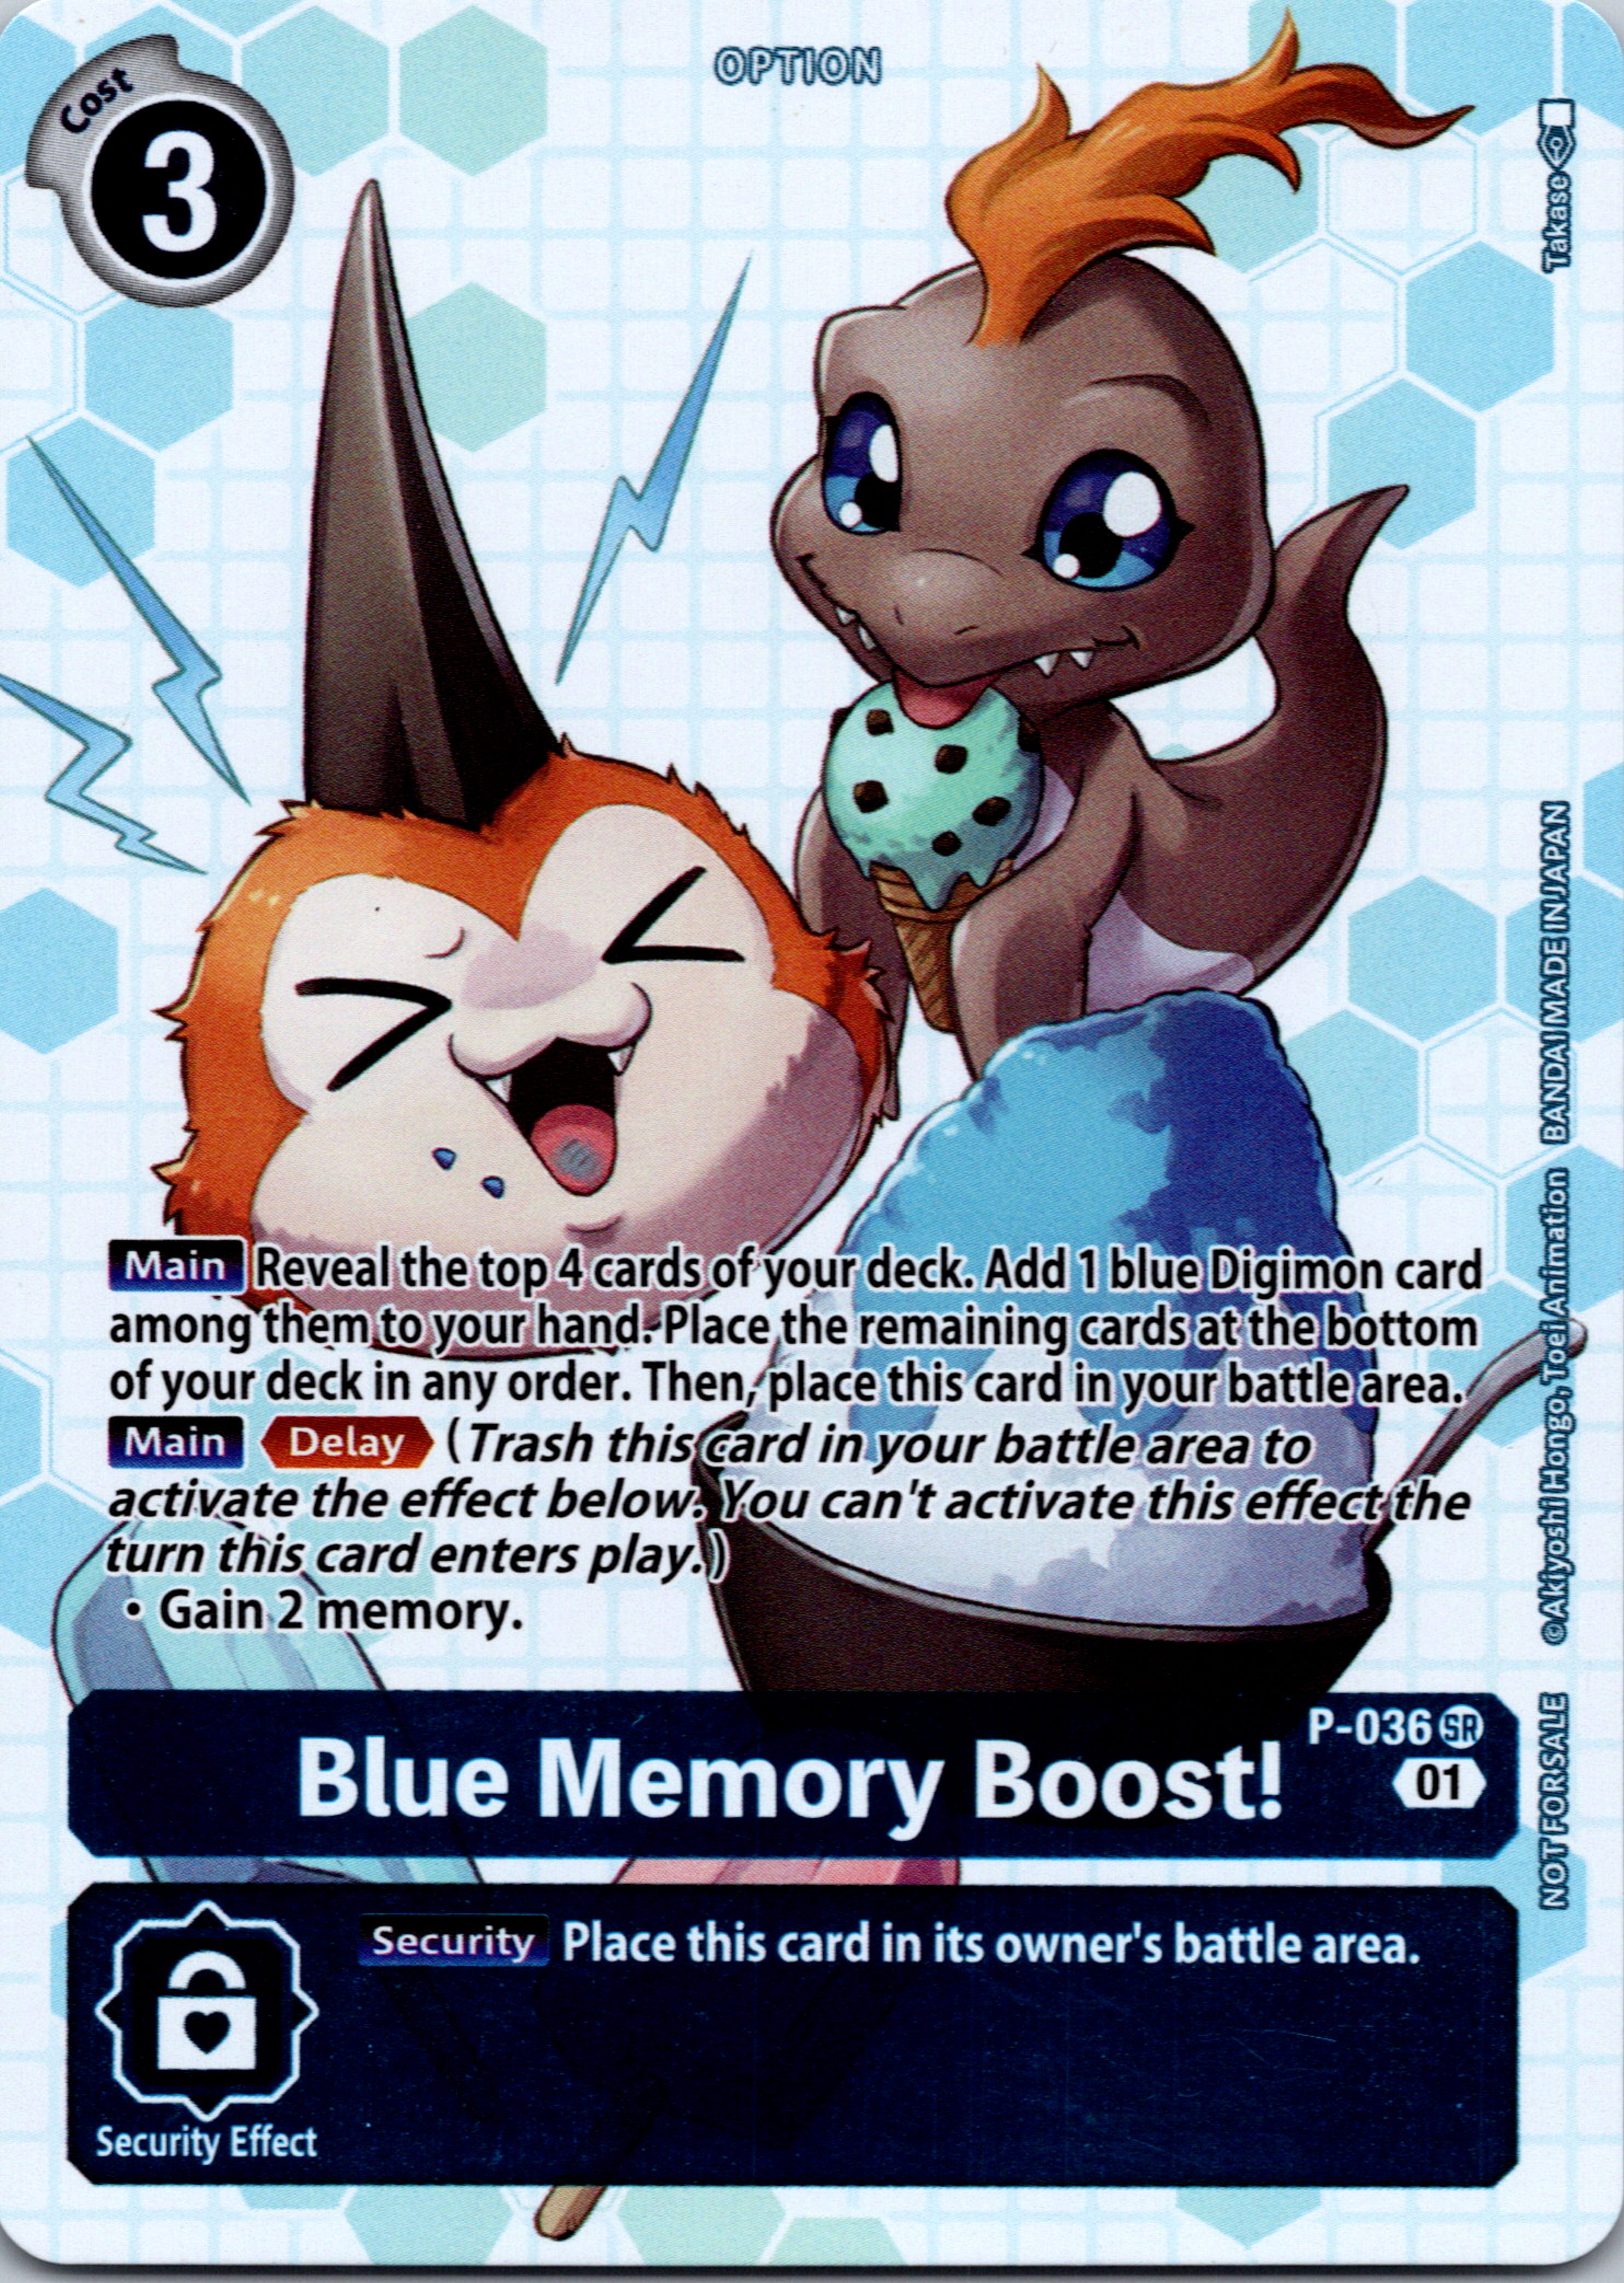 Blue Memory Boost! - P-036 (Next Adventure Box Promotion Pack) [P-036] [Digimon Promotion Cards] Normal